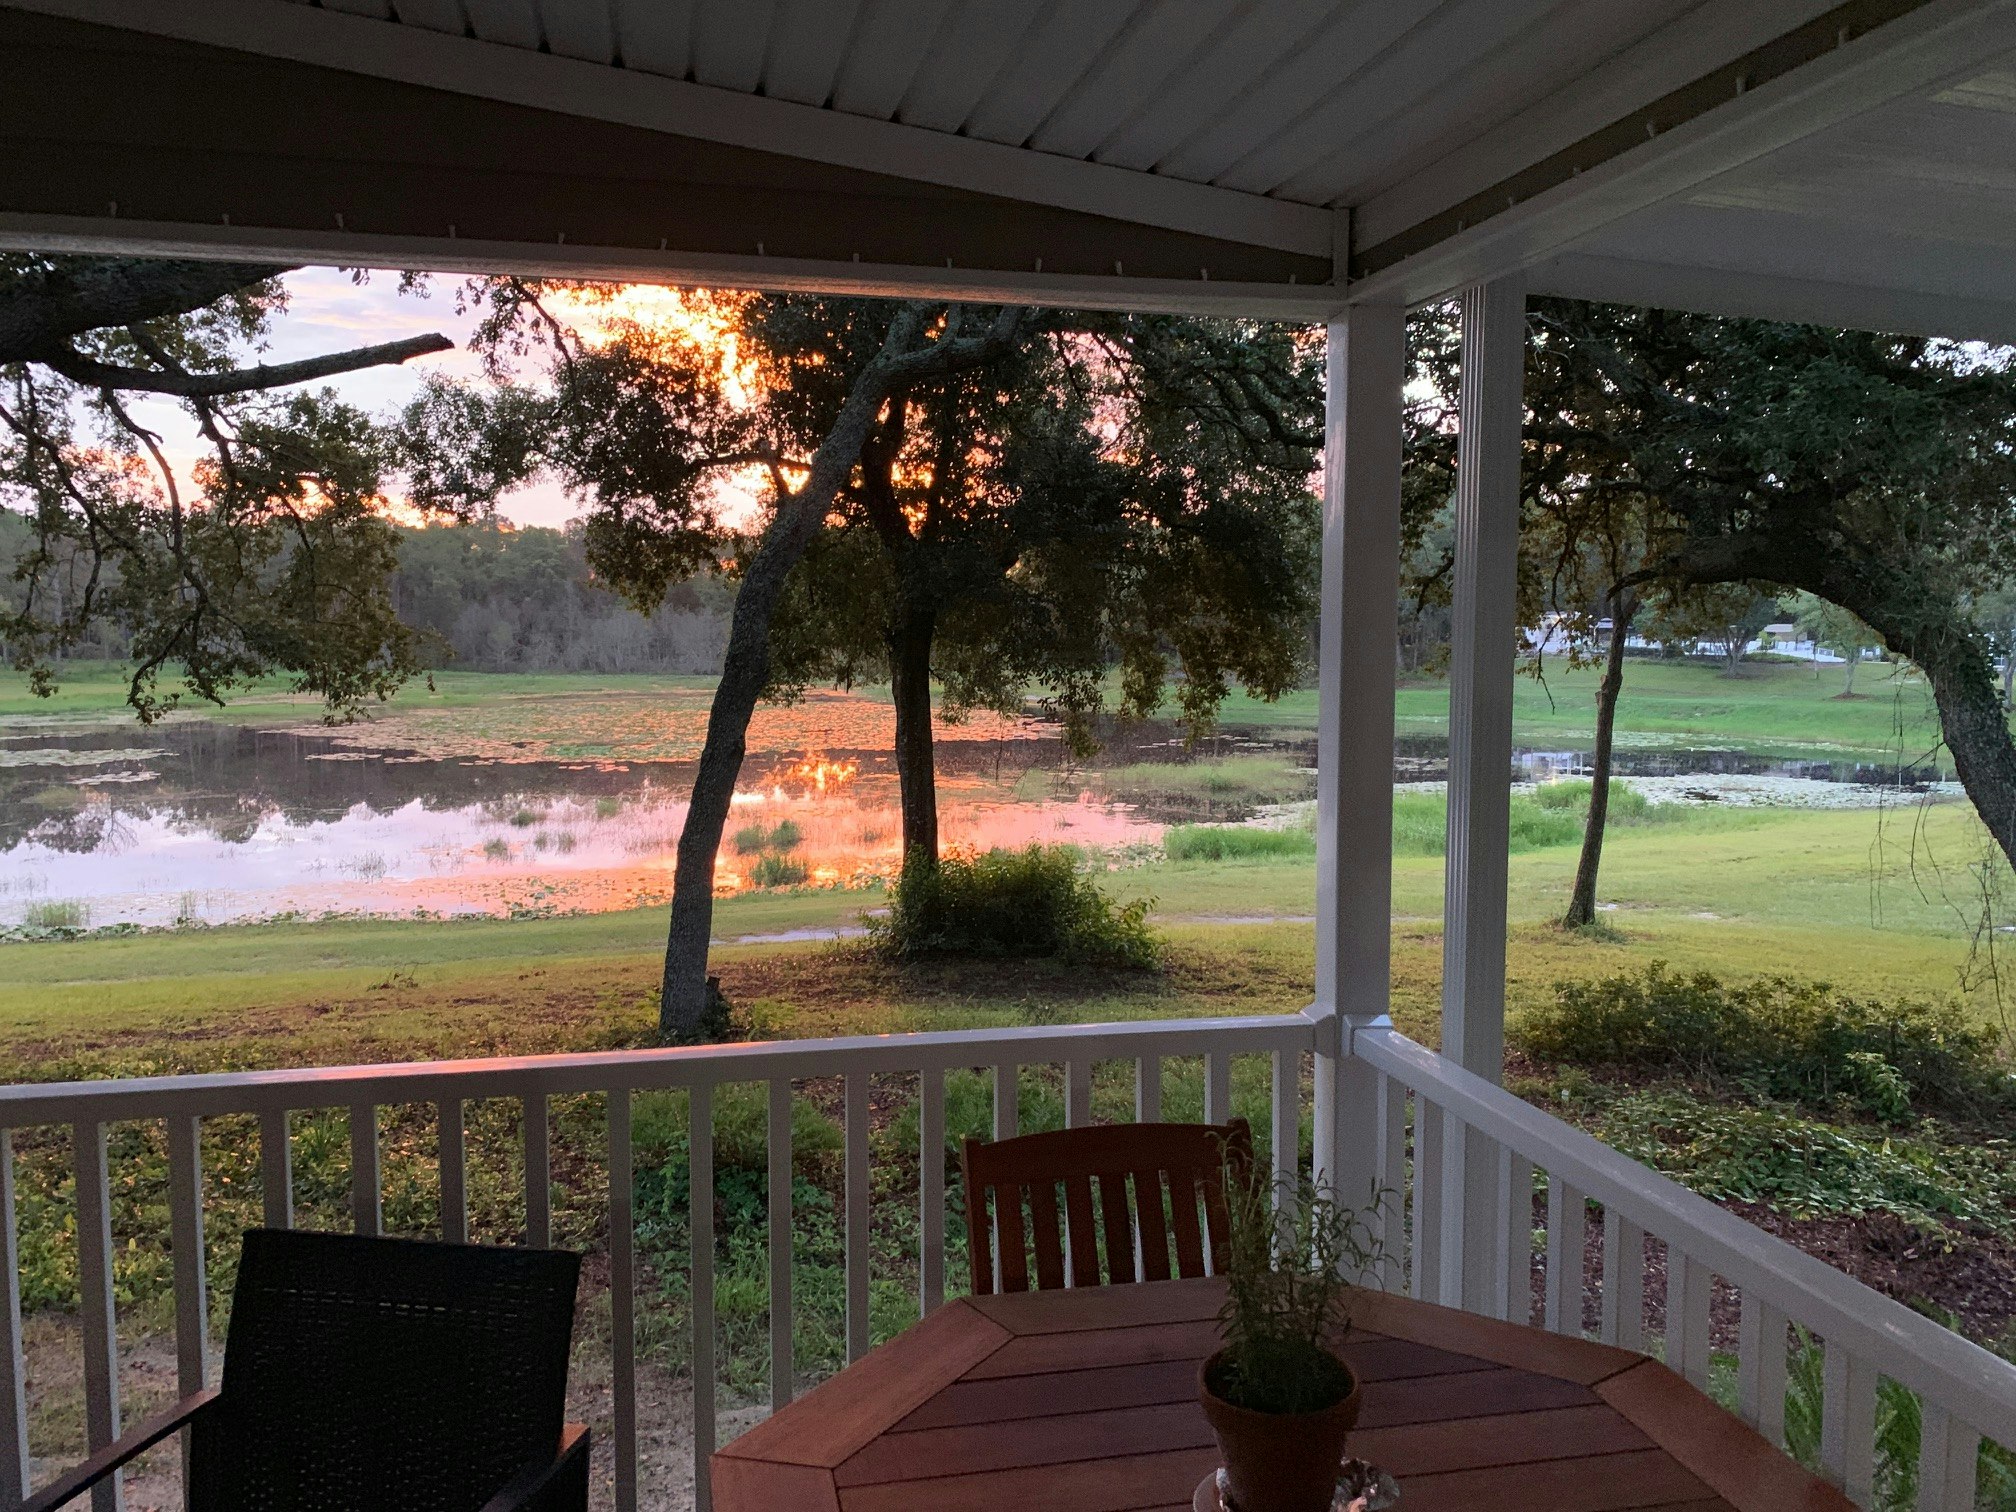 The corner of a whitewashed wooden porch furnished with a dark teak patio set frames a view of a small pond, which is reflecting a brilliant orange and pink Florida sunset at the Sunny Sands Naturalist Resort.